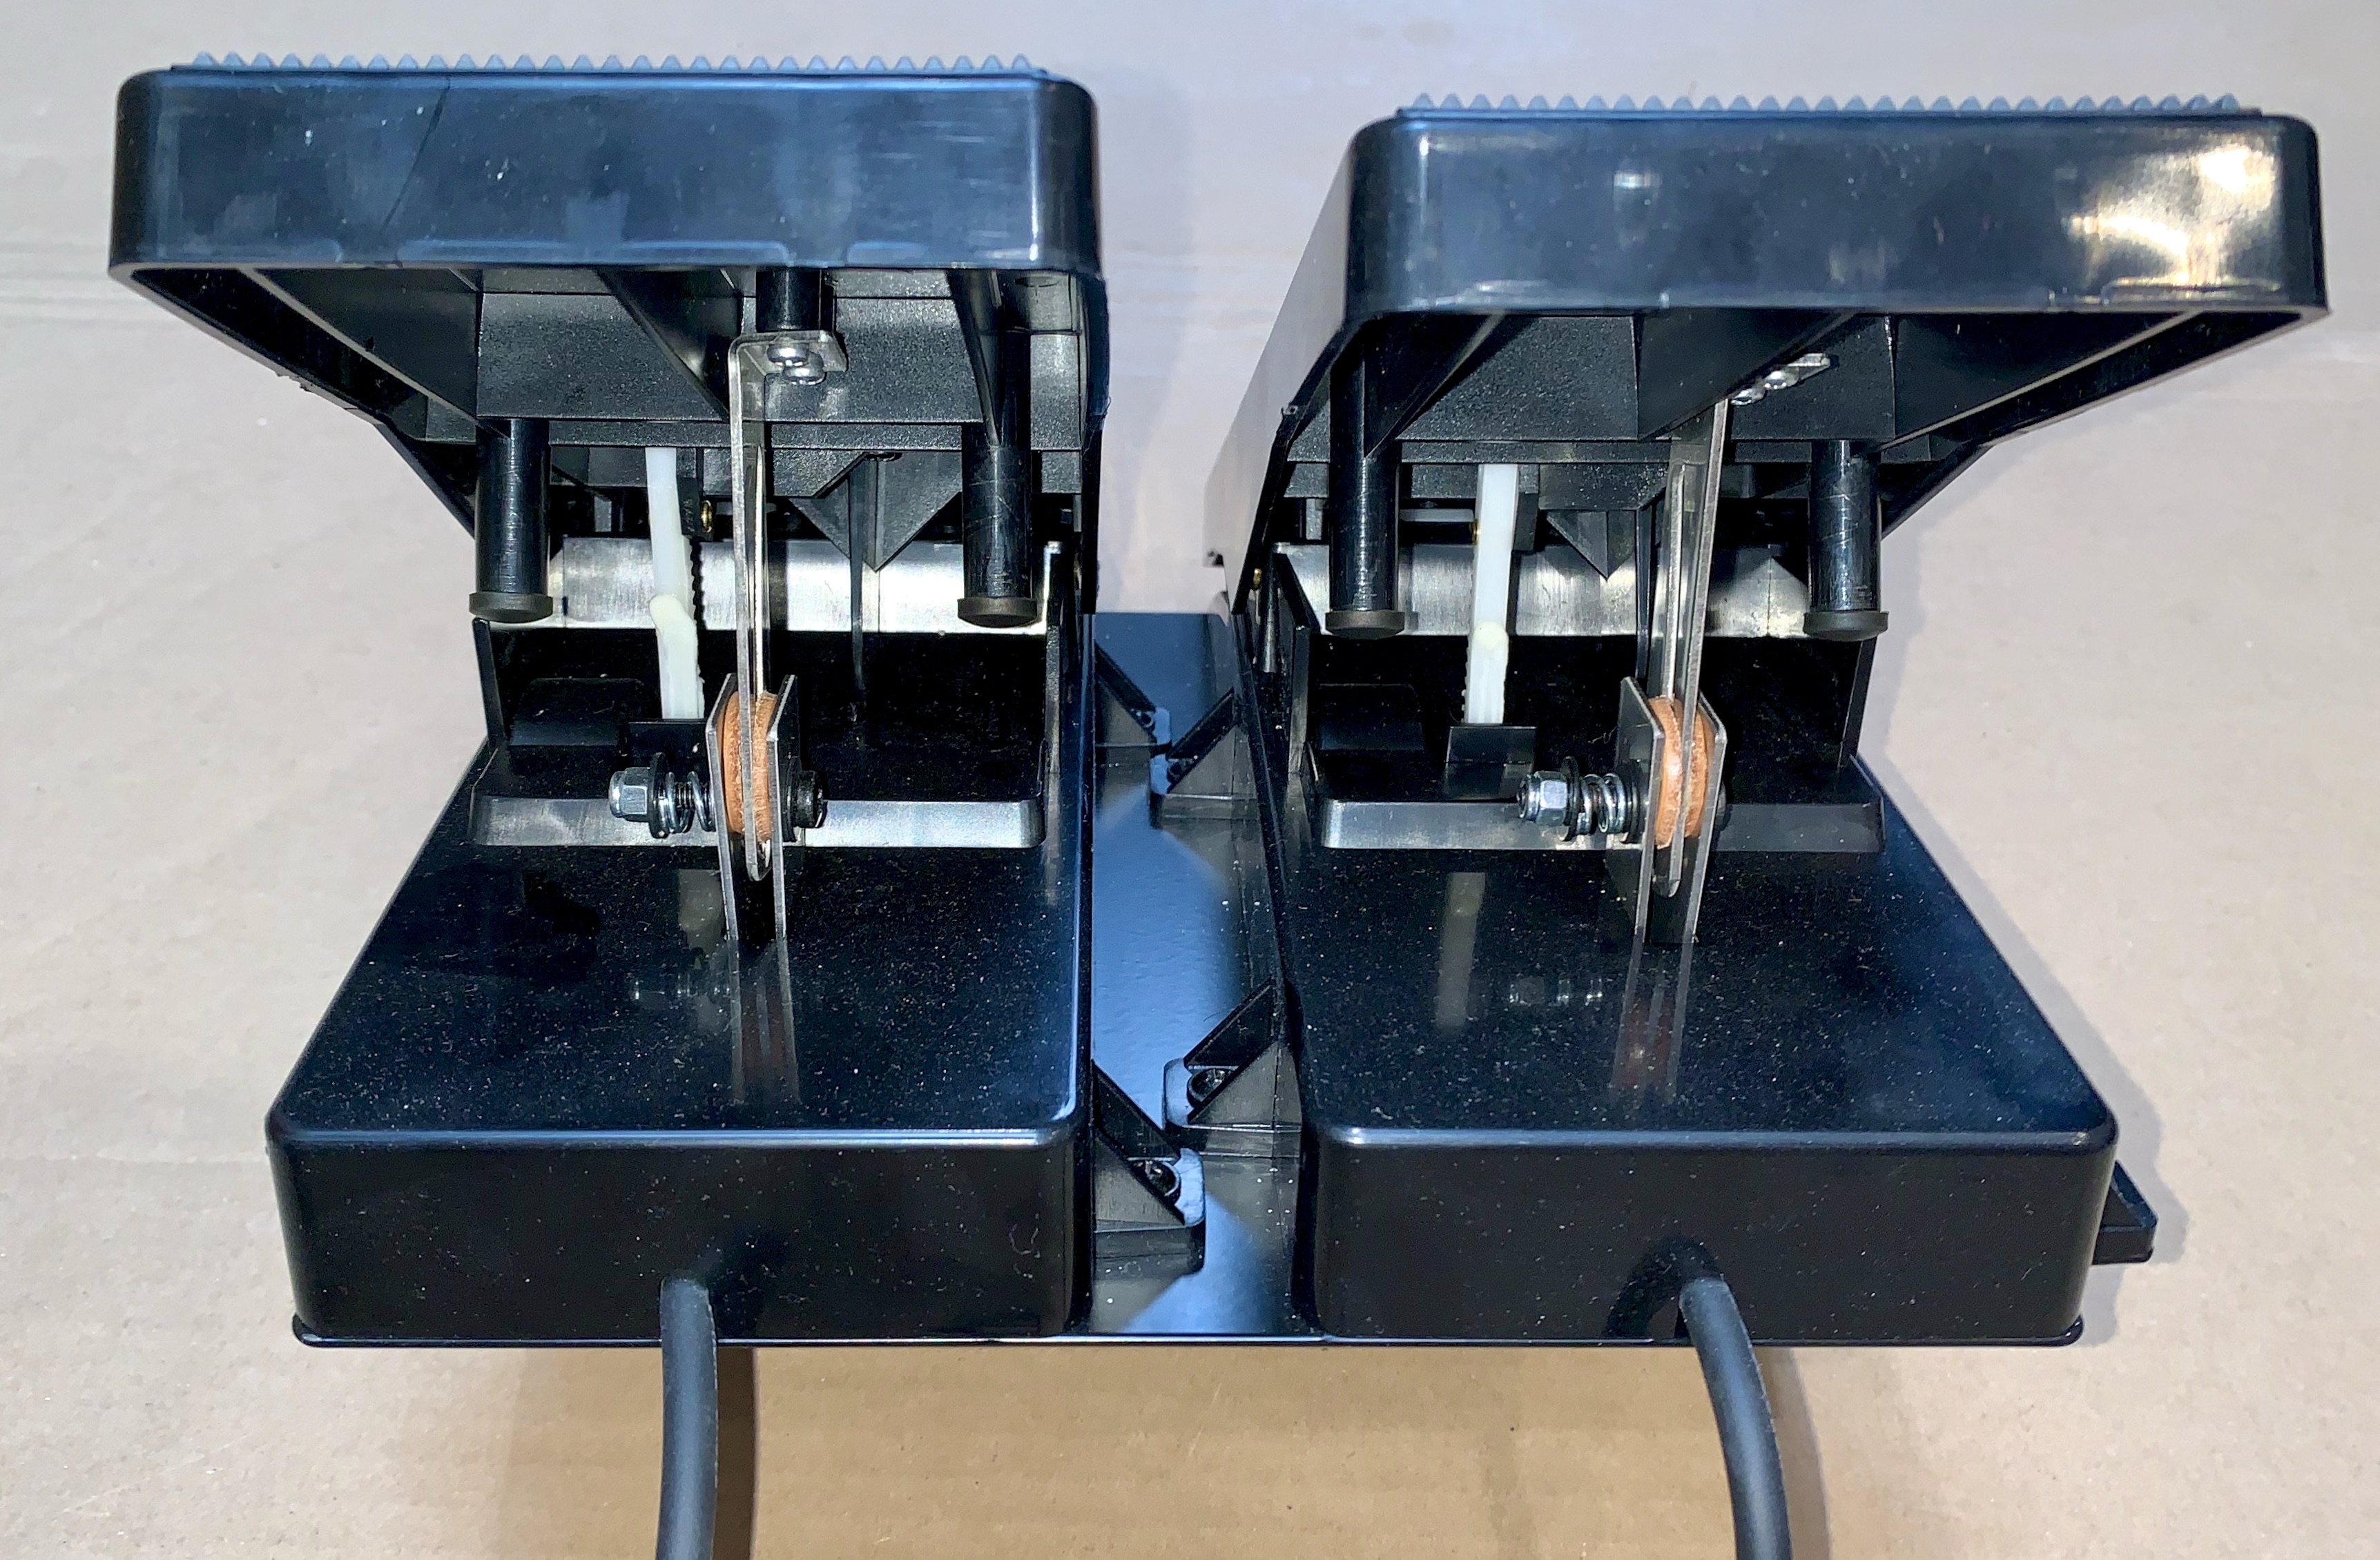 Rear view of the expression pedals. You can clearly see the compression arrangement for friction.